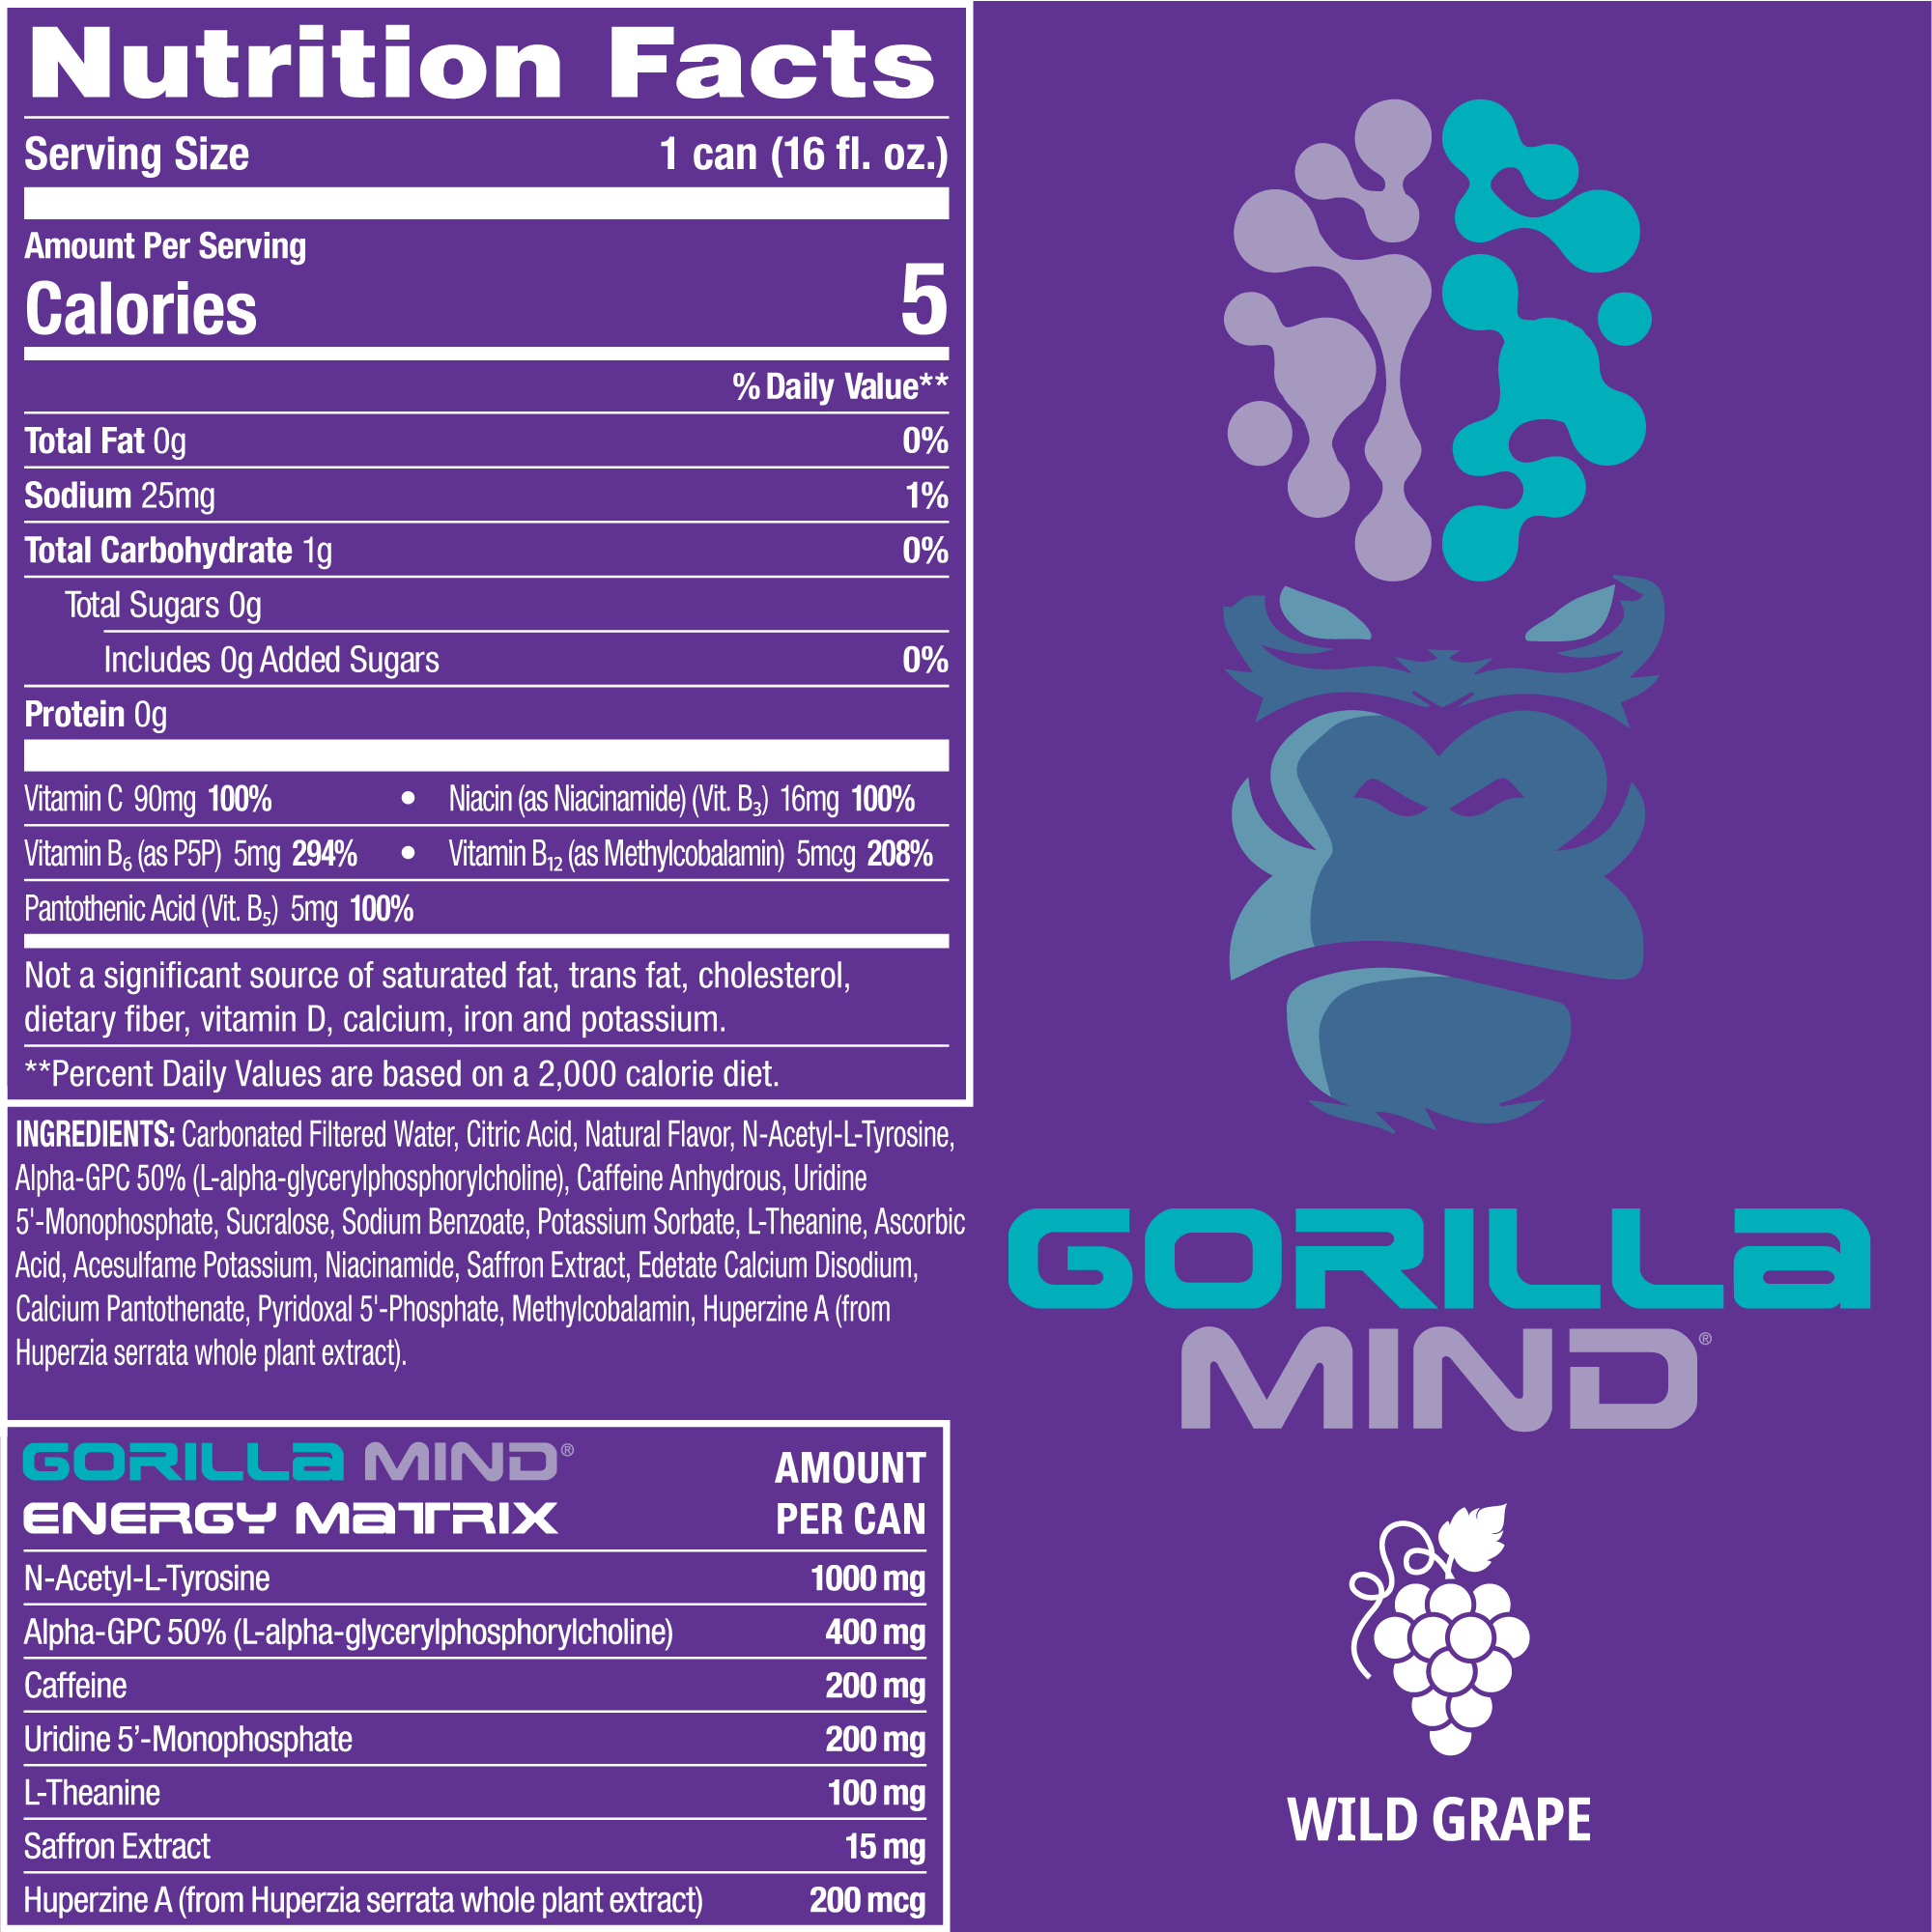 Wild Grape Nutrition Facts